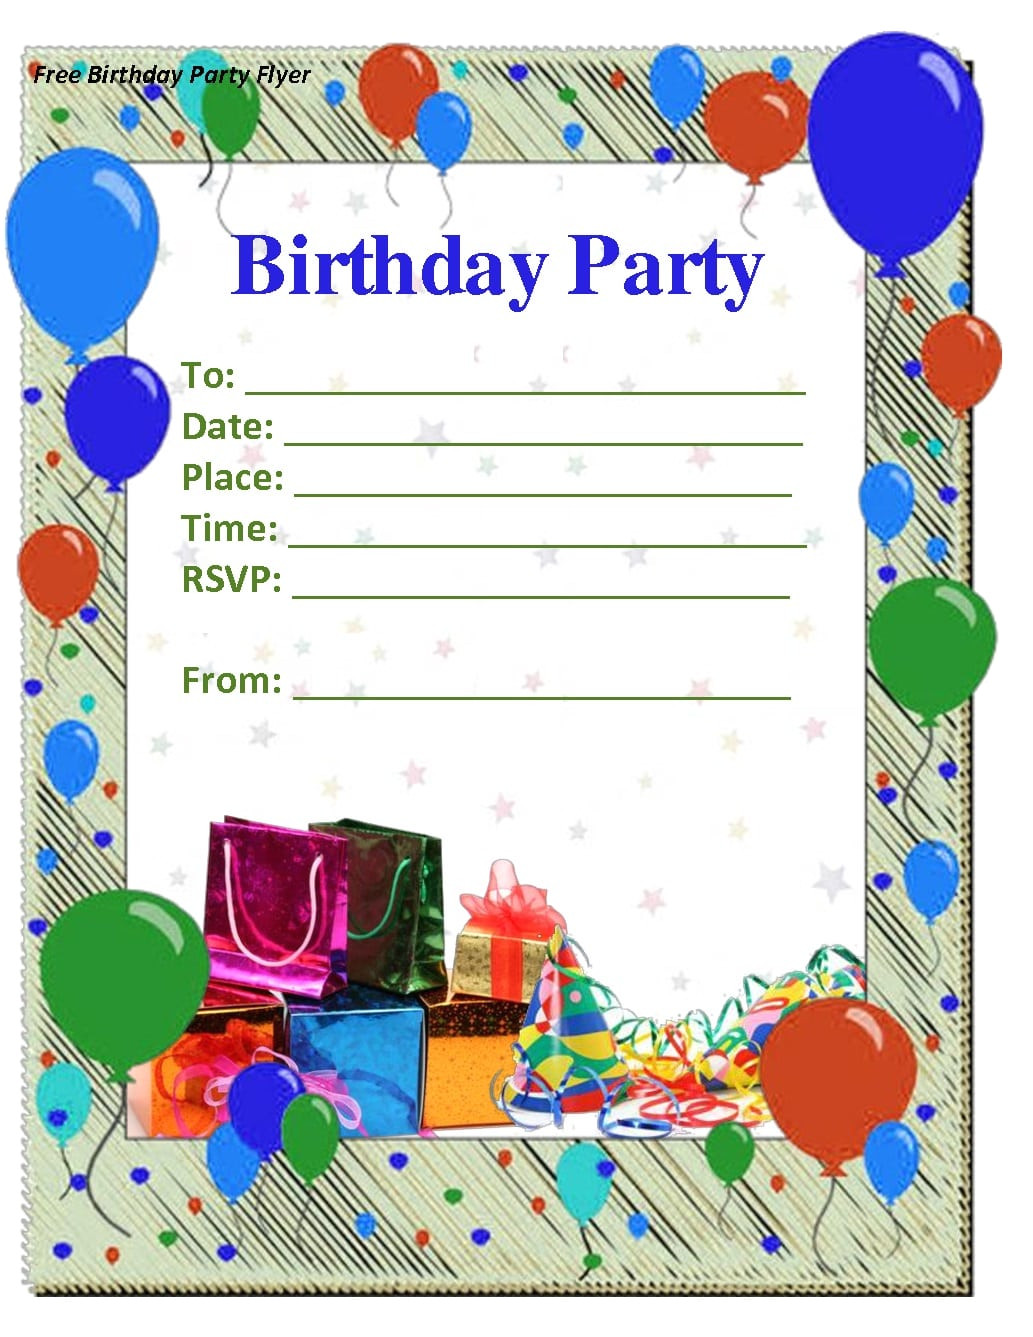 birthday party invitation templates free download